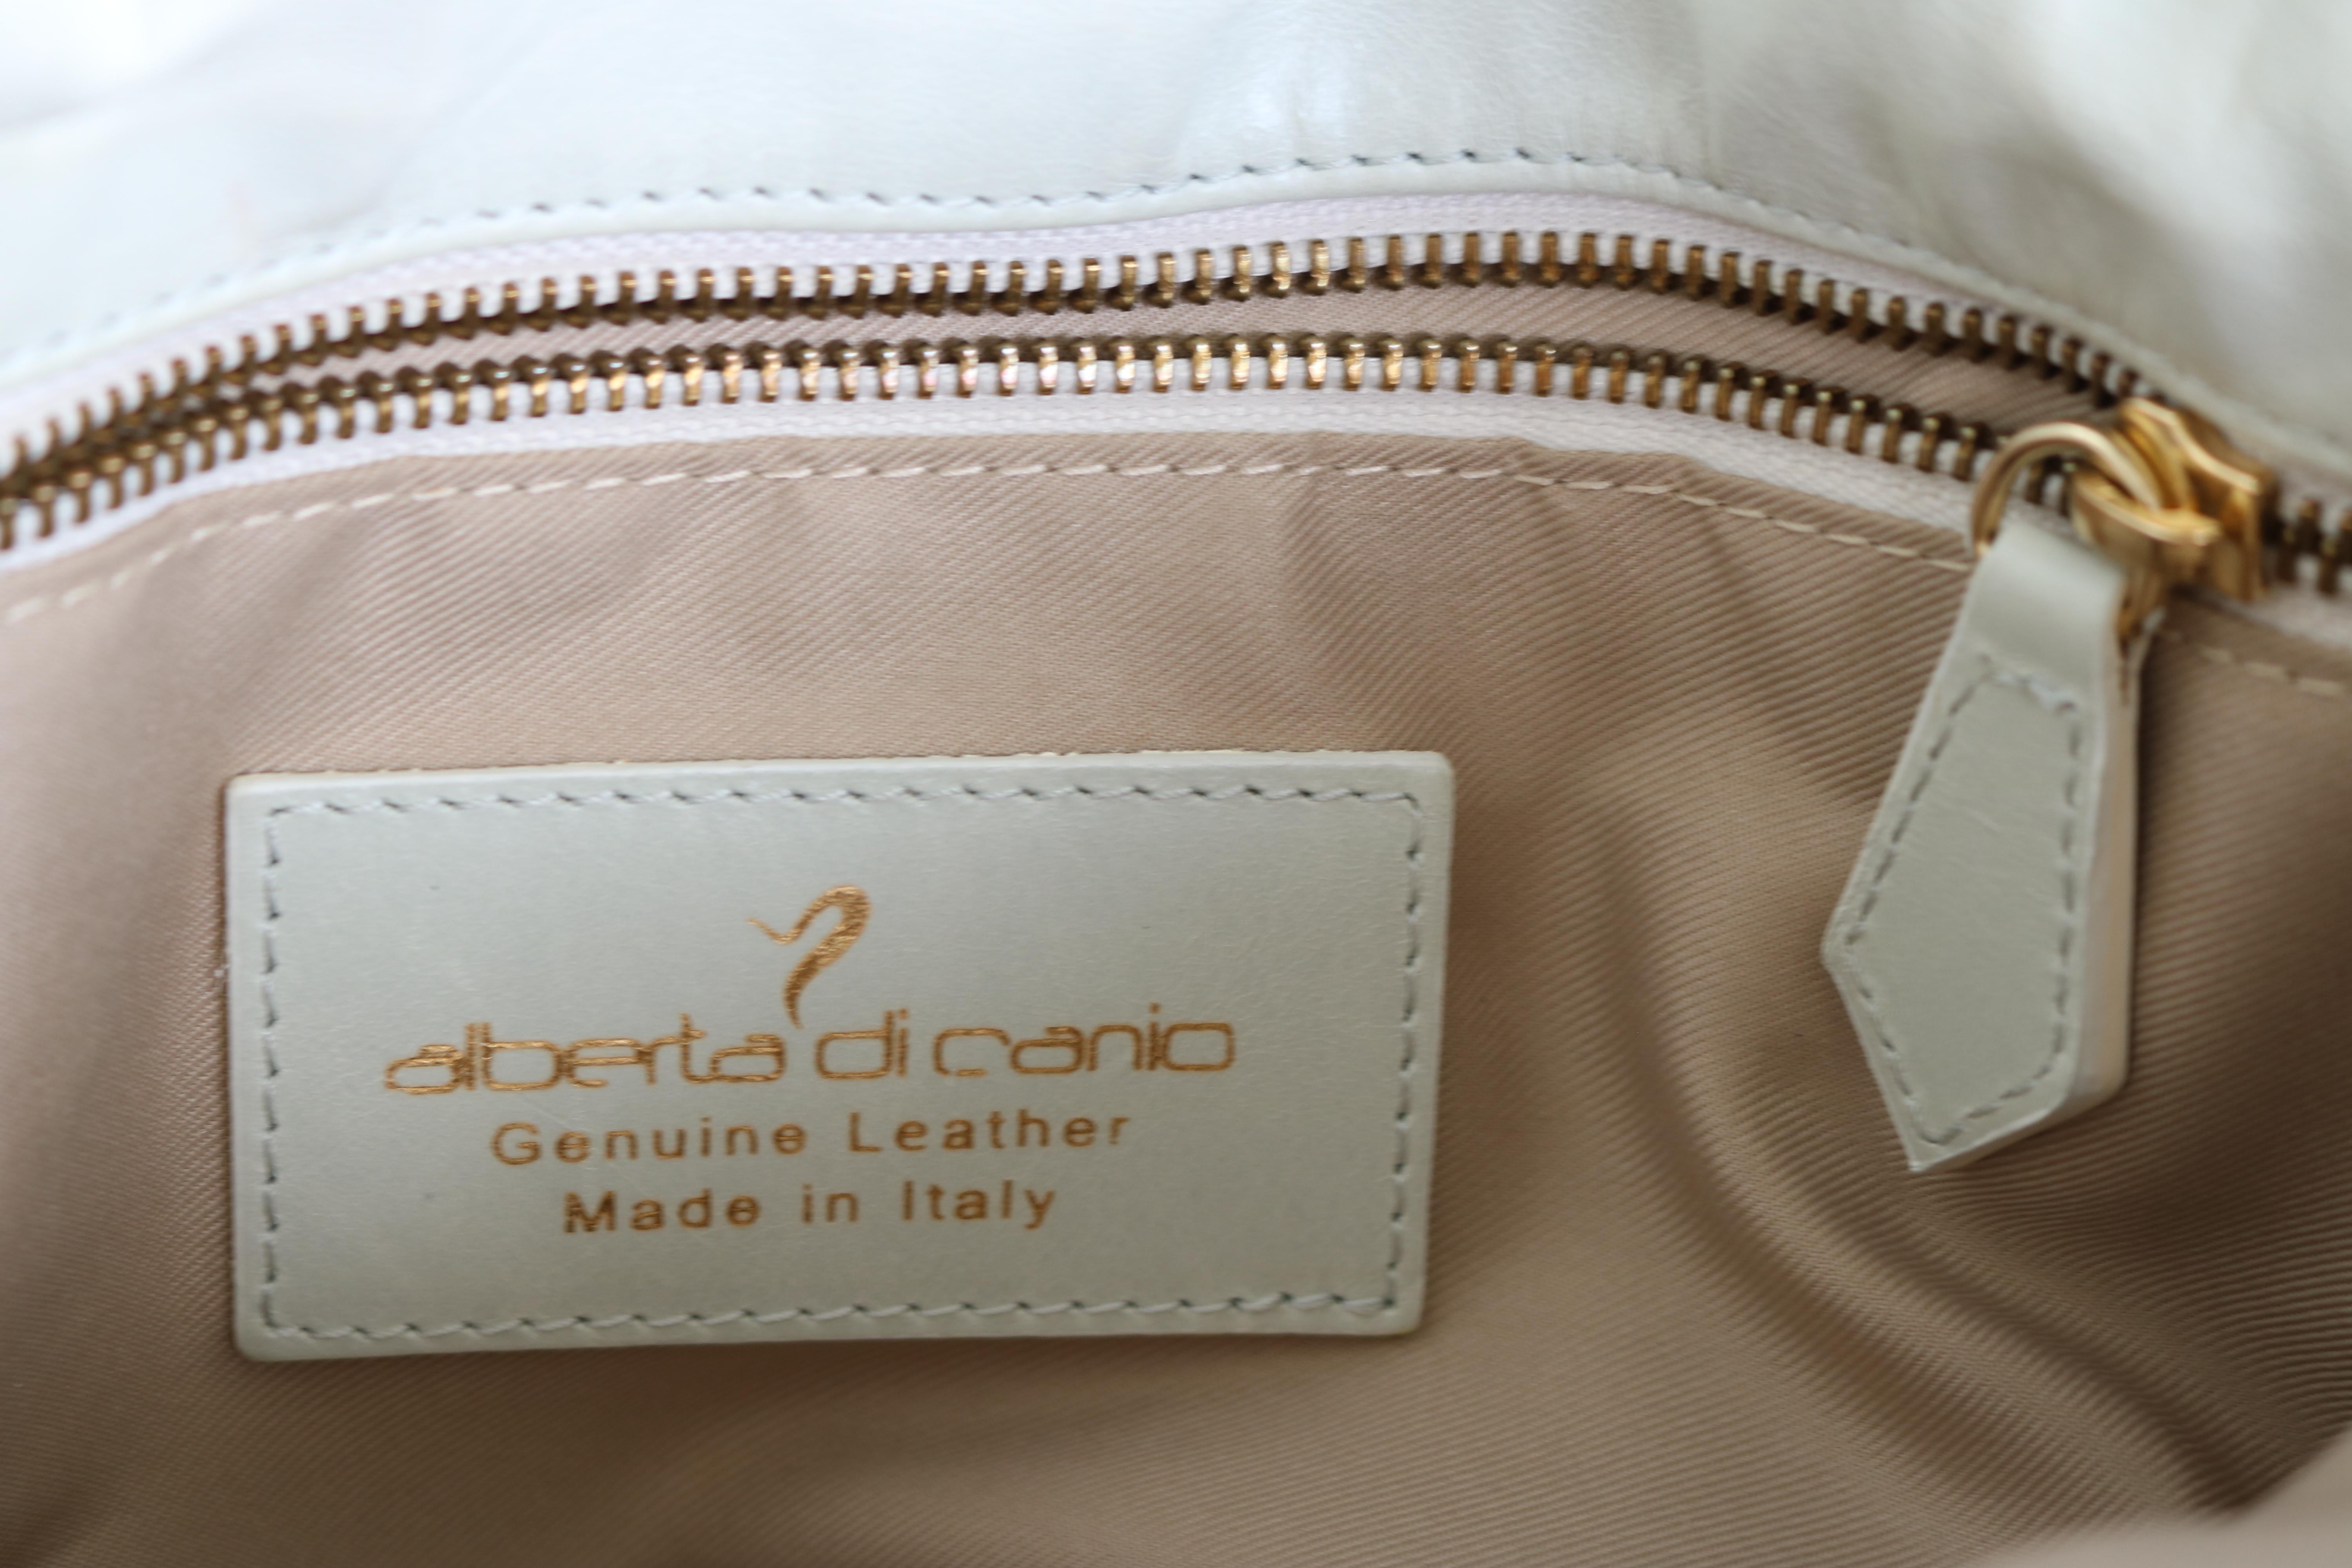 Alberto di Canio Tasseled Soft Lambskin Leather Handbag-Italy In Good Condition For Sale In West Palm Beach, FL